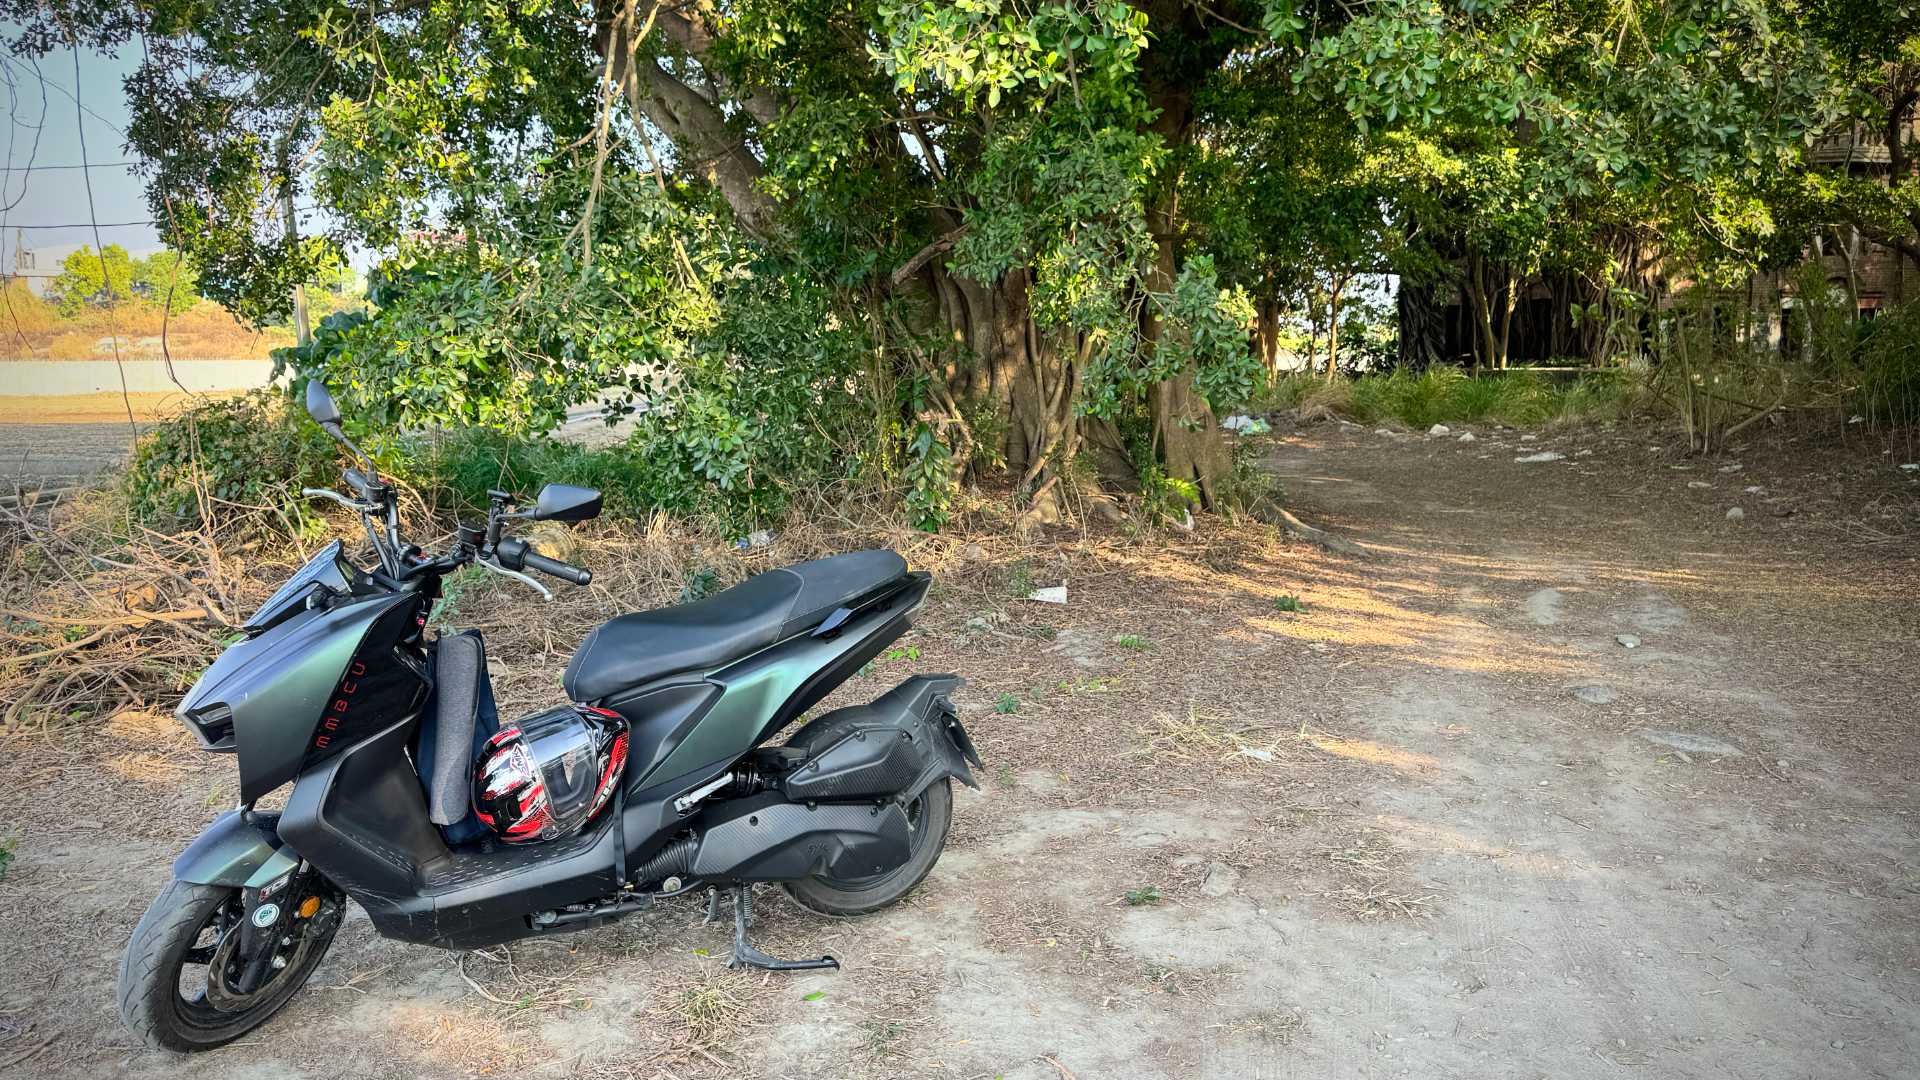 An SYM MMBCU scooter parked at the end of a dirt road, with a forest beyond it.